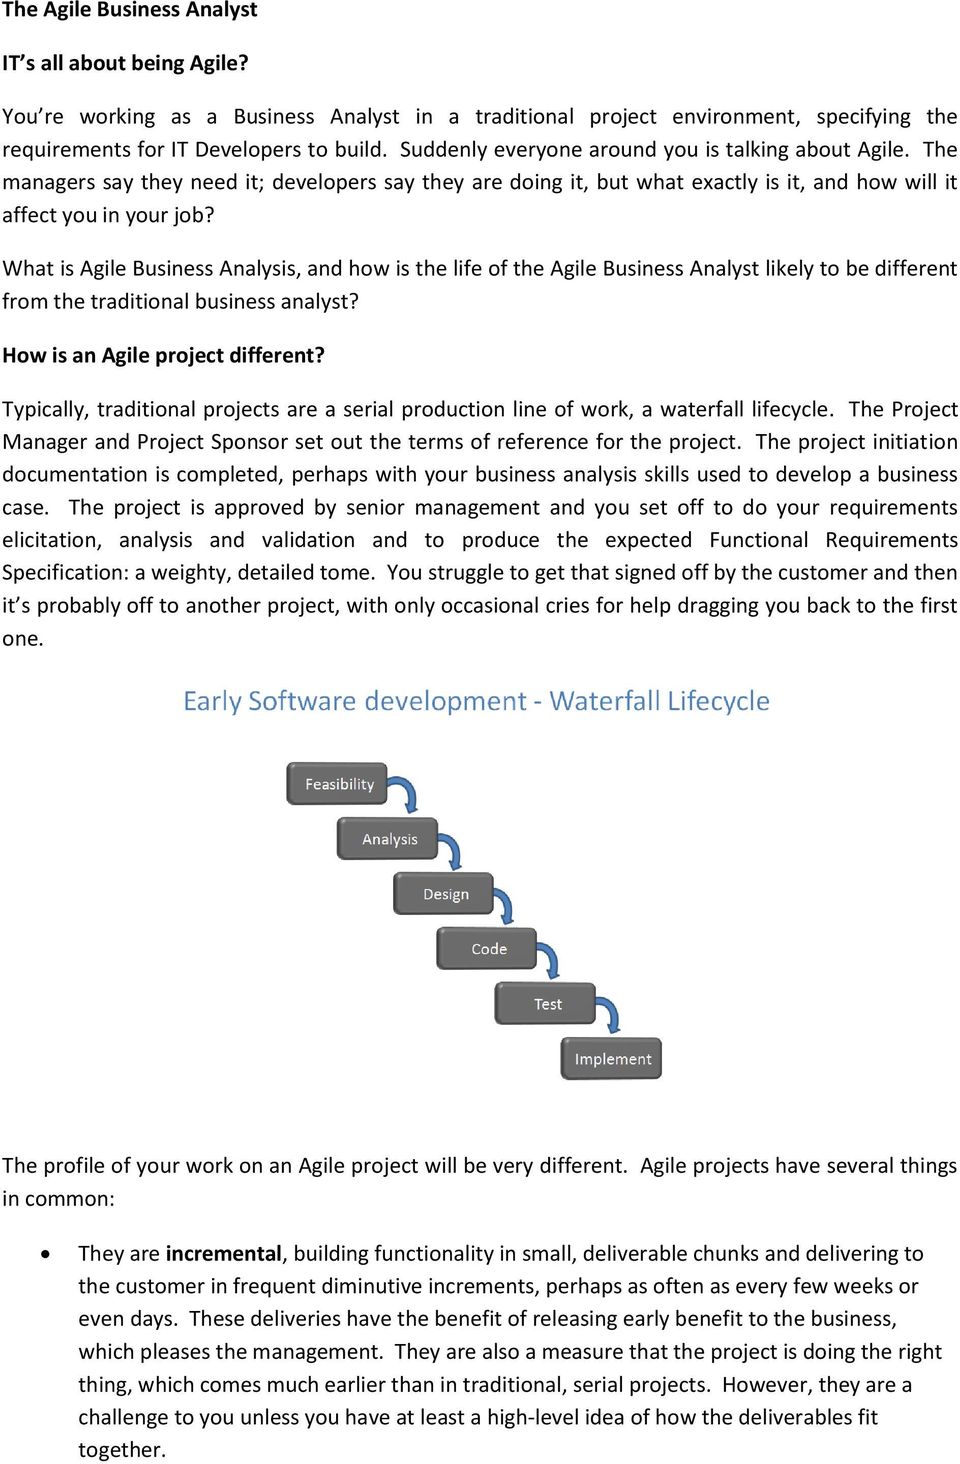 What is Agile Business Analysis, and how is the life of the Agile Business Analyst likely to be different from the traditional business analyst? How is an Agile project different?